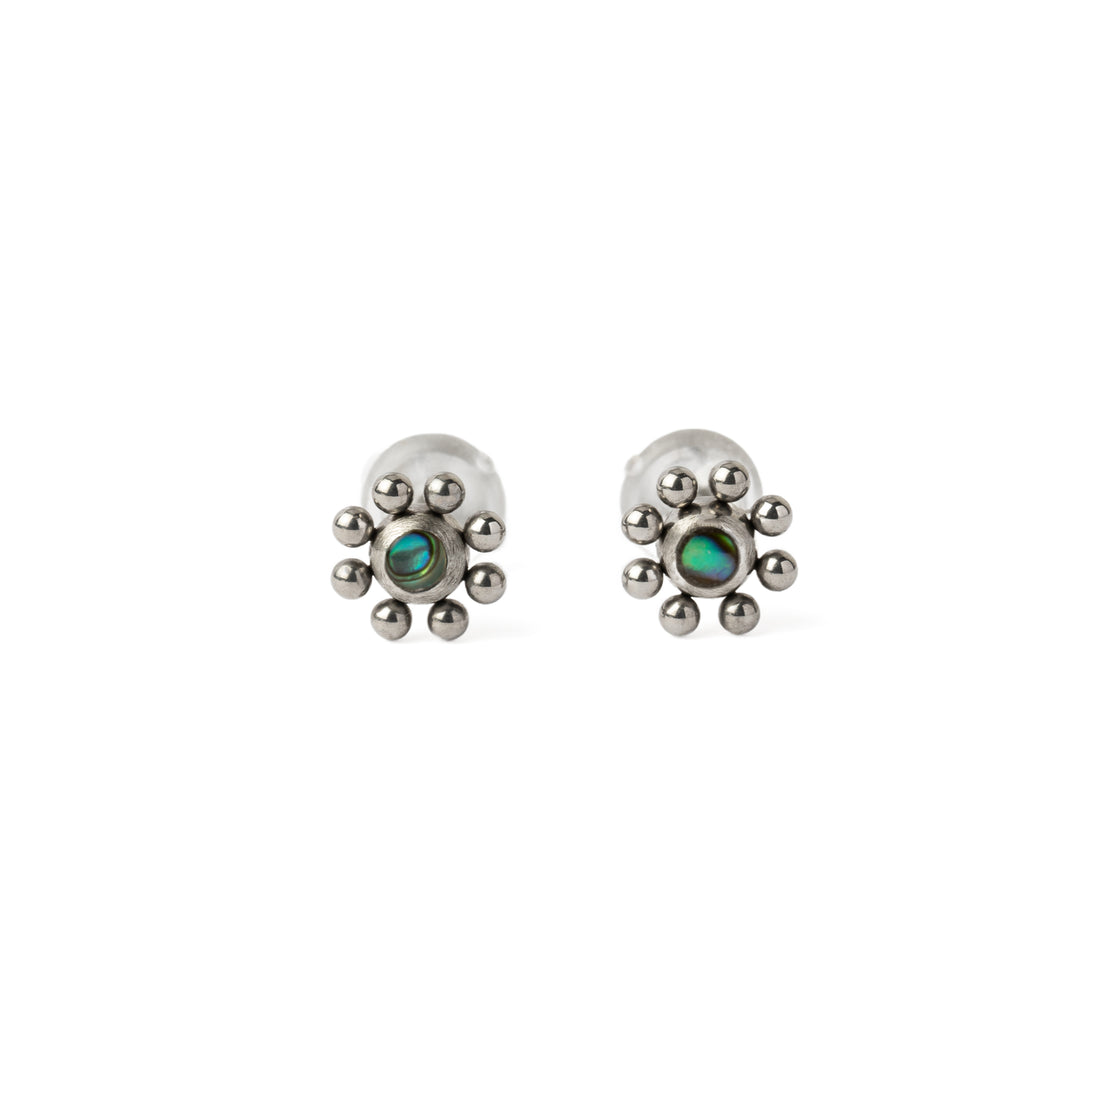 Daisy Abalone Ear Studs frontal view